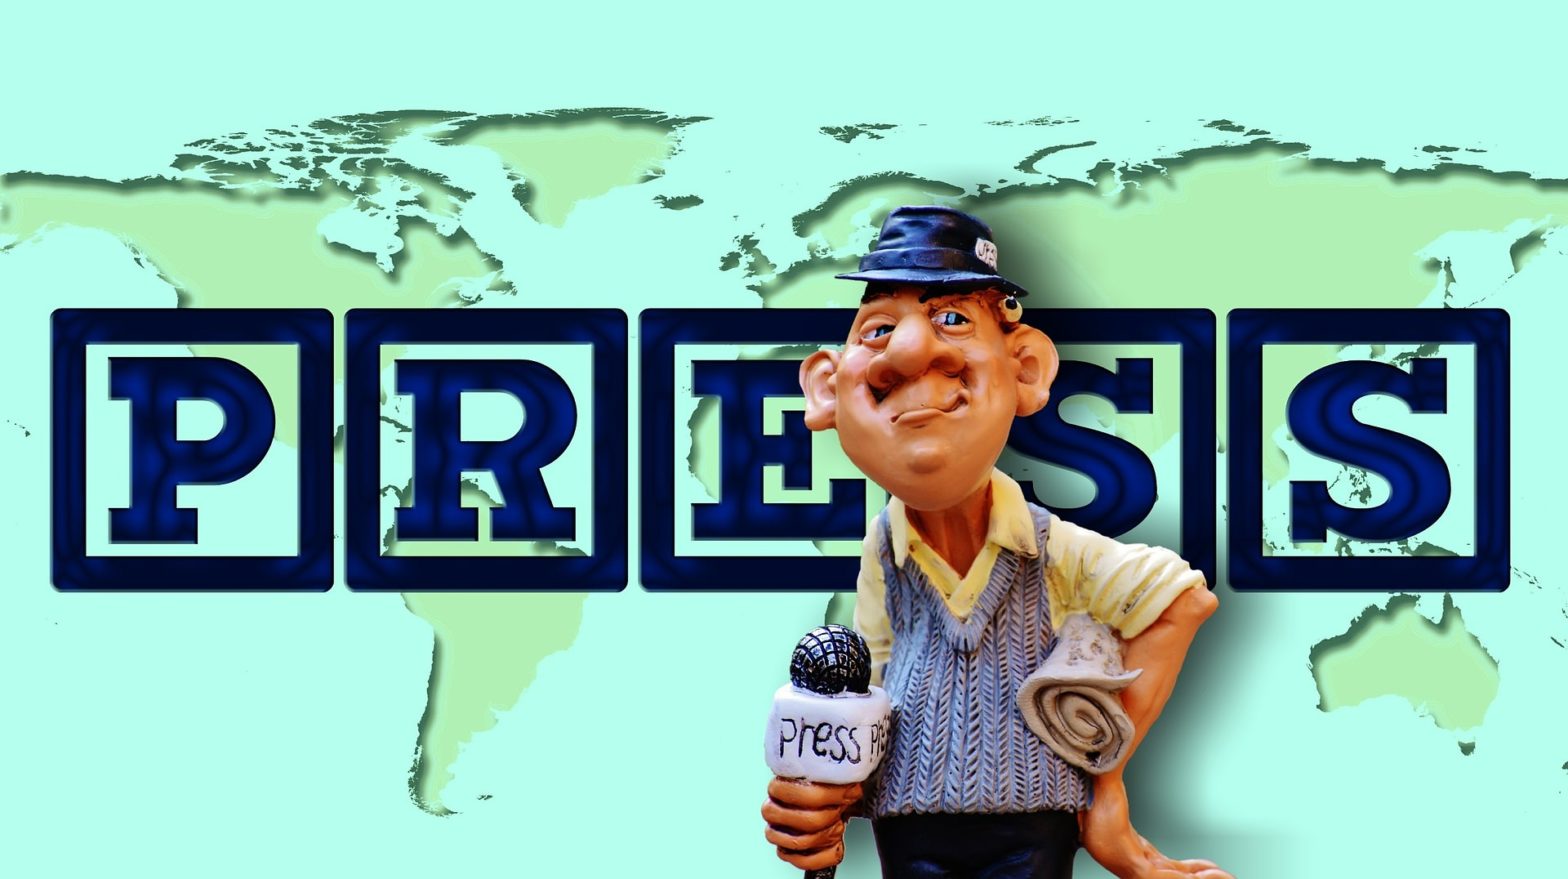 image of a cartoon man in front of press and world image